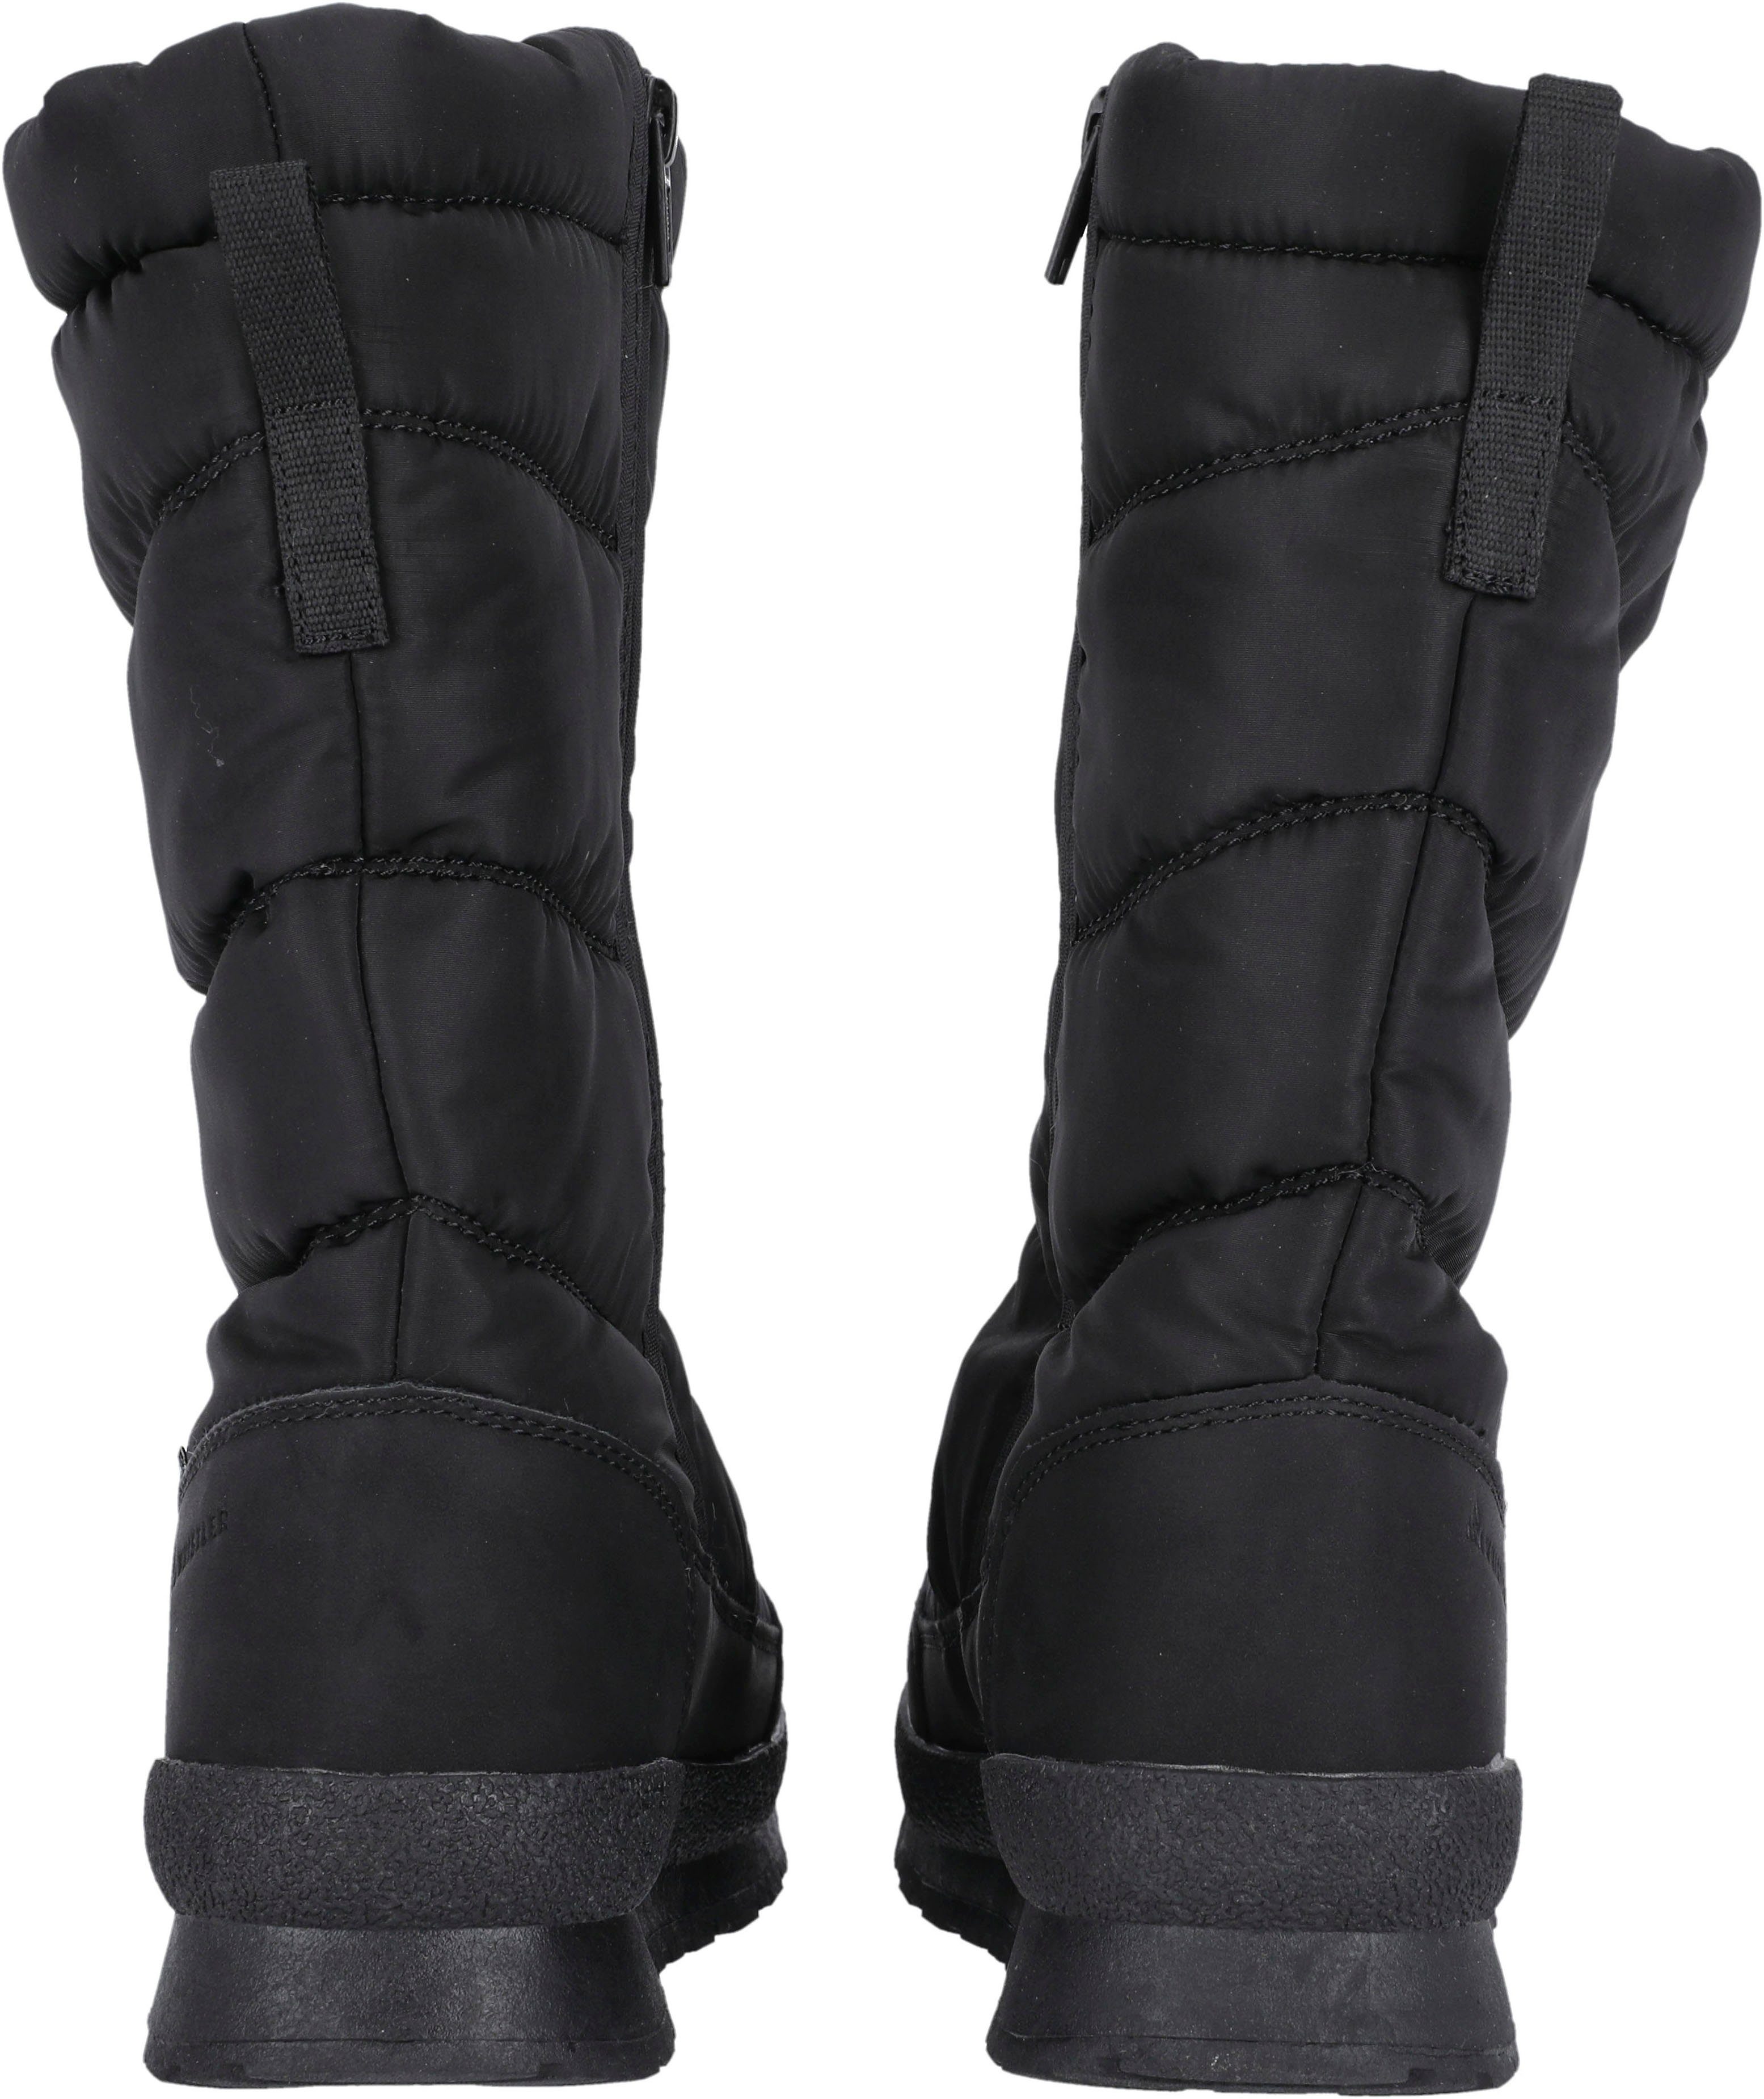 Warmfutter Winterboots WHISTLER WHW234153